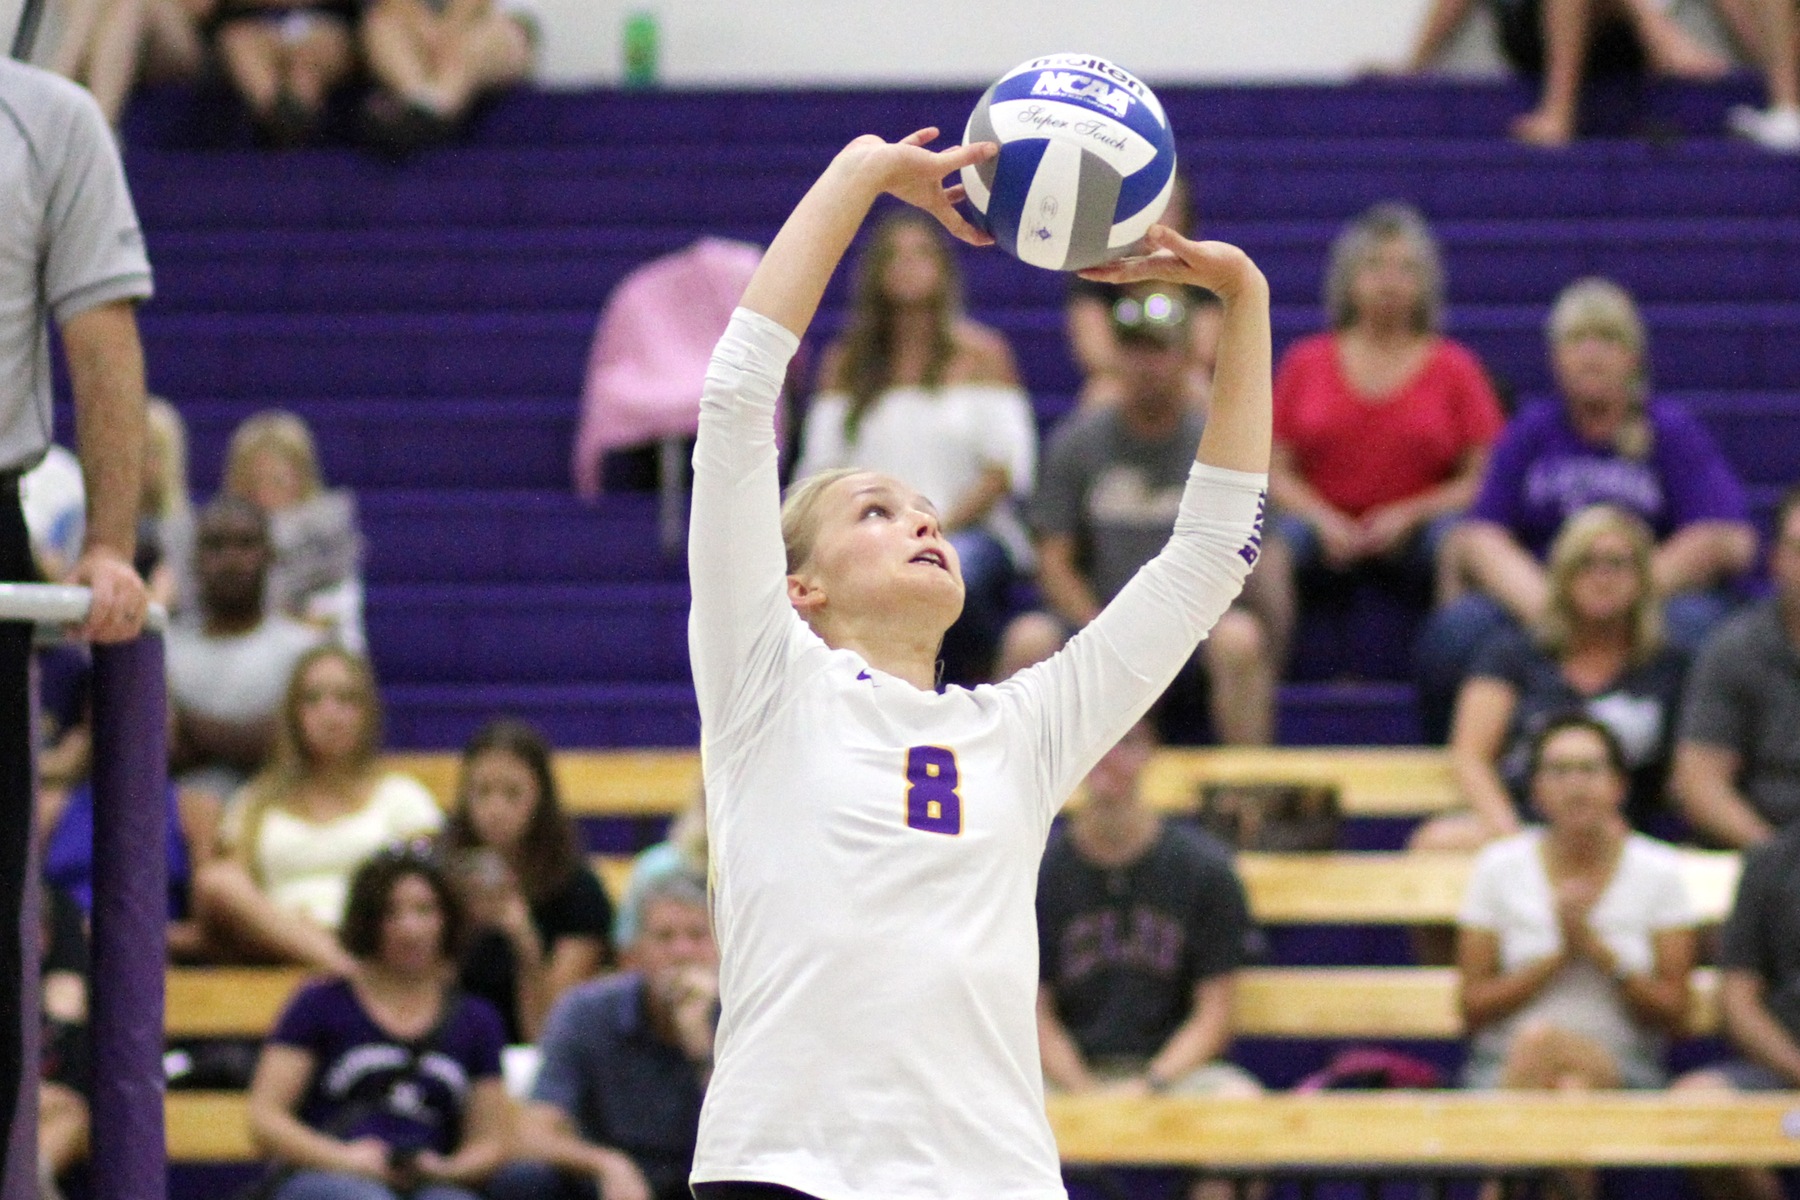 Jamie Smith had a match-high 40 assists against Pomona-Pitzer (Photo: Tracy L. Olson).